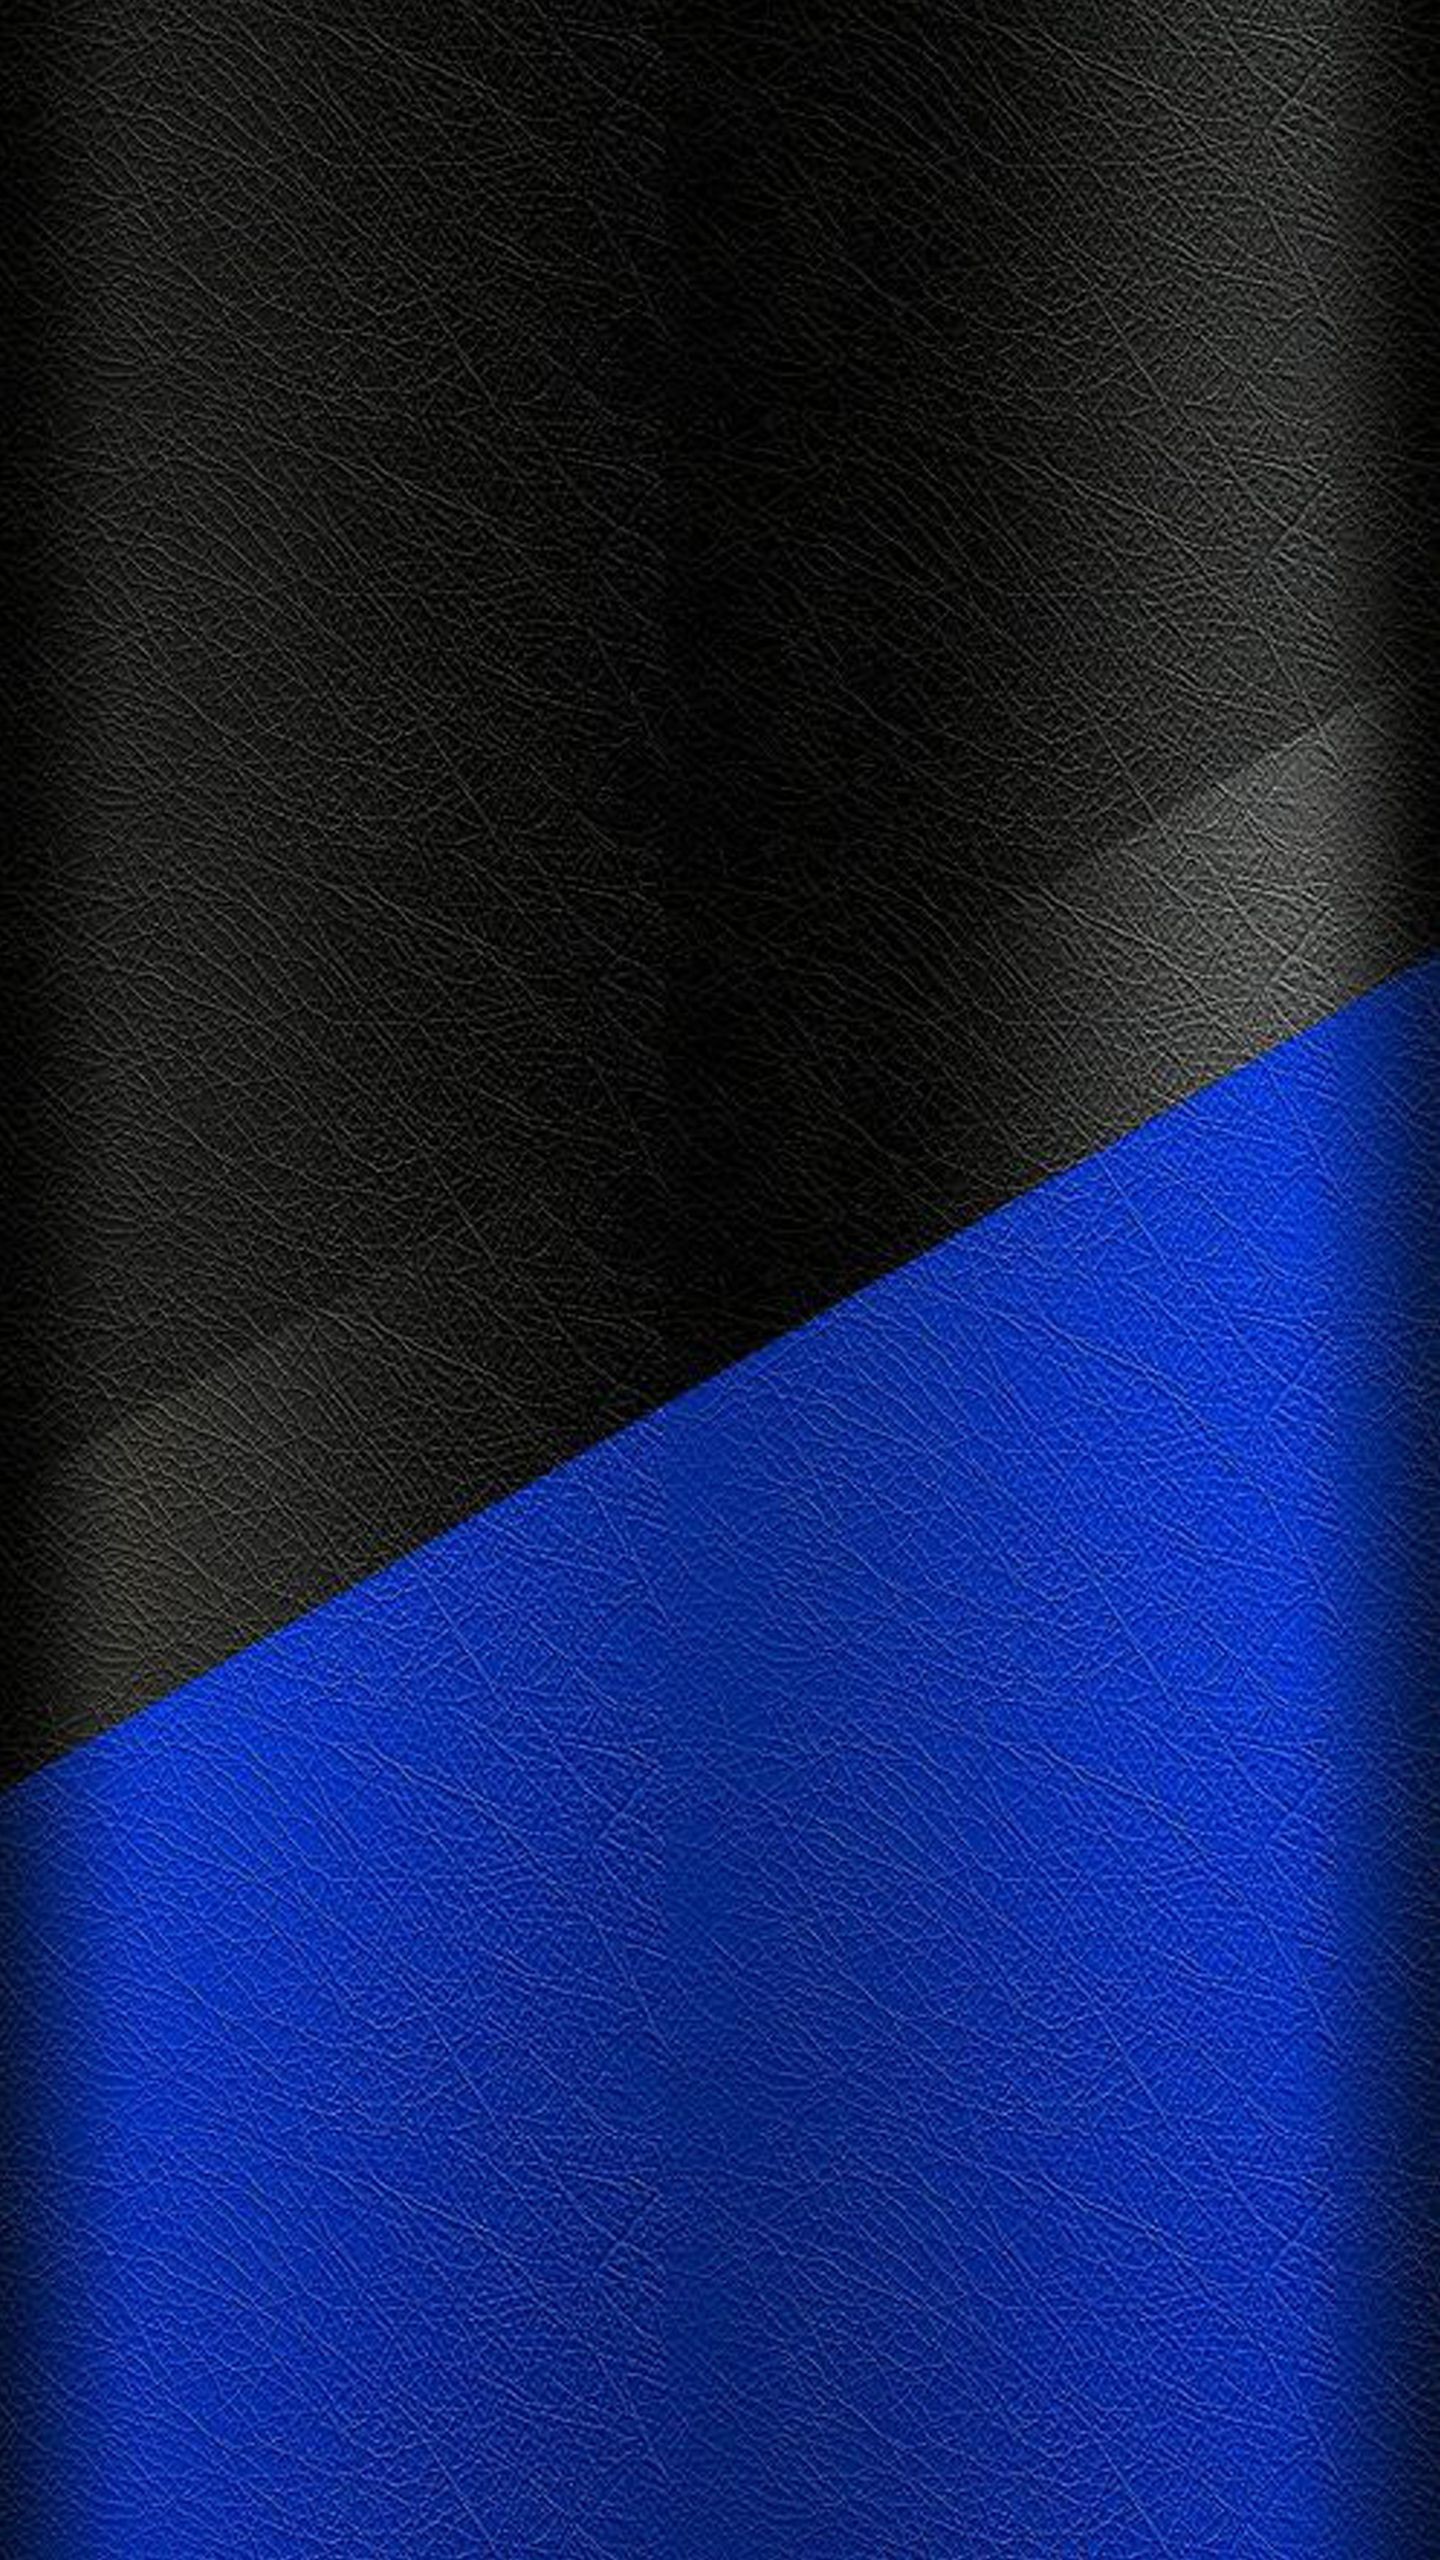 1440x2560 I named this picture as the Dark S7 Edge Wallpaper 02, one of my best  collection of wallpaper for Samsung Galaxy S7 Edge. A special wallpaper  which ...